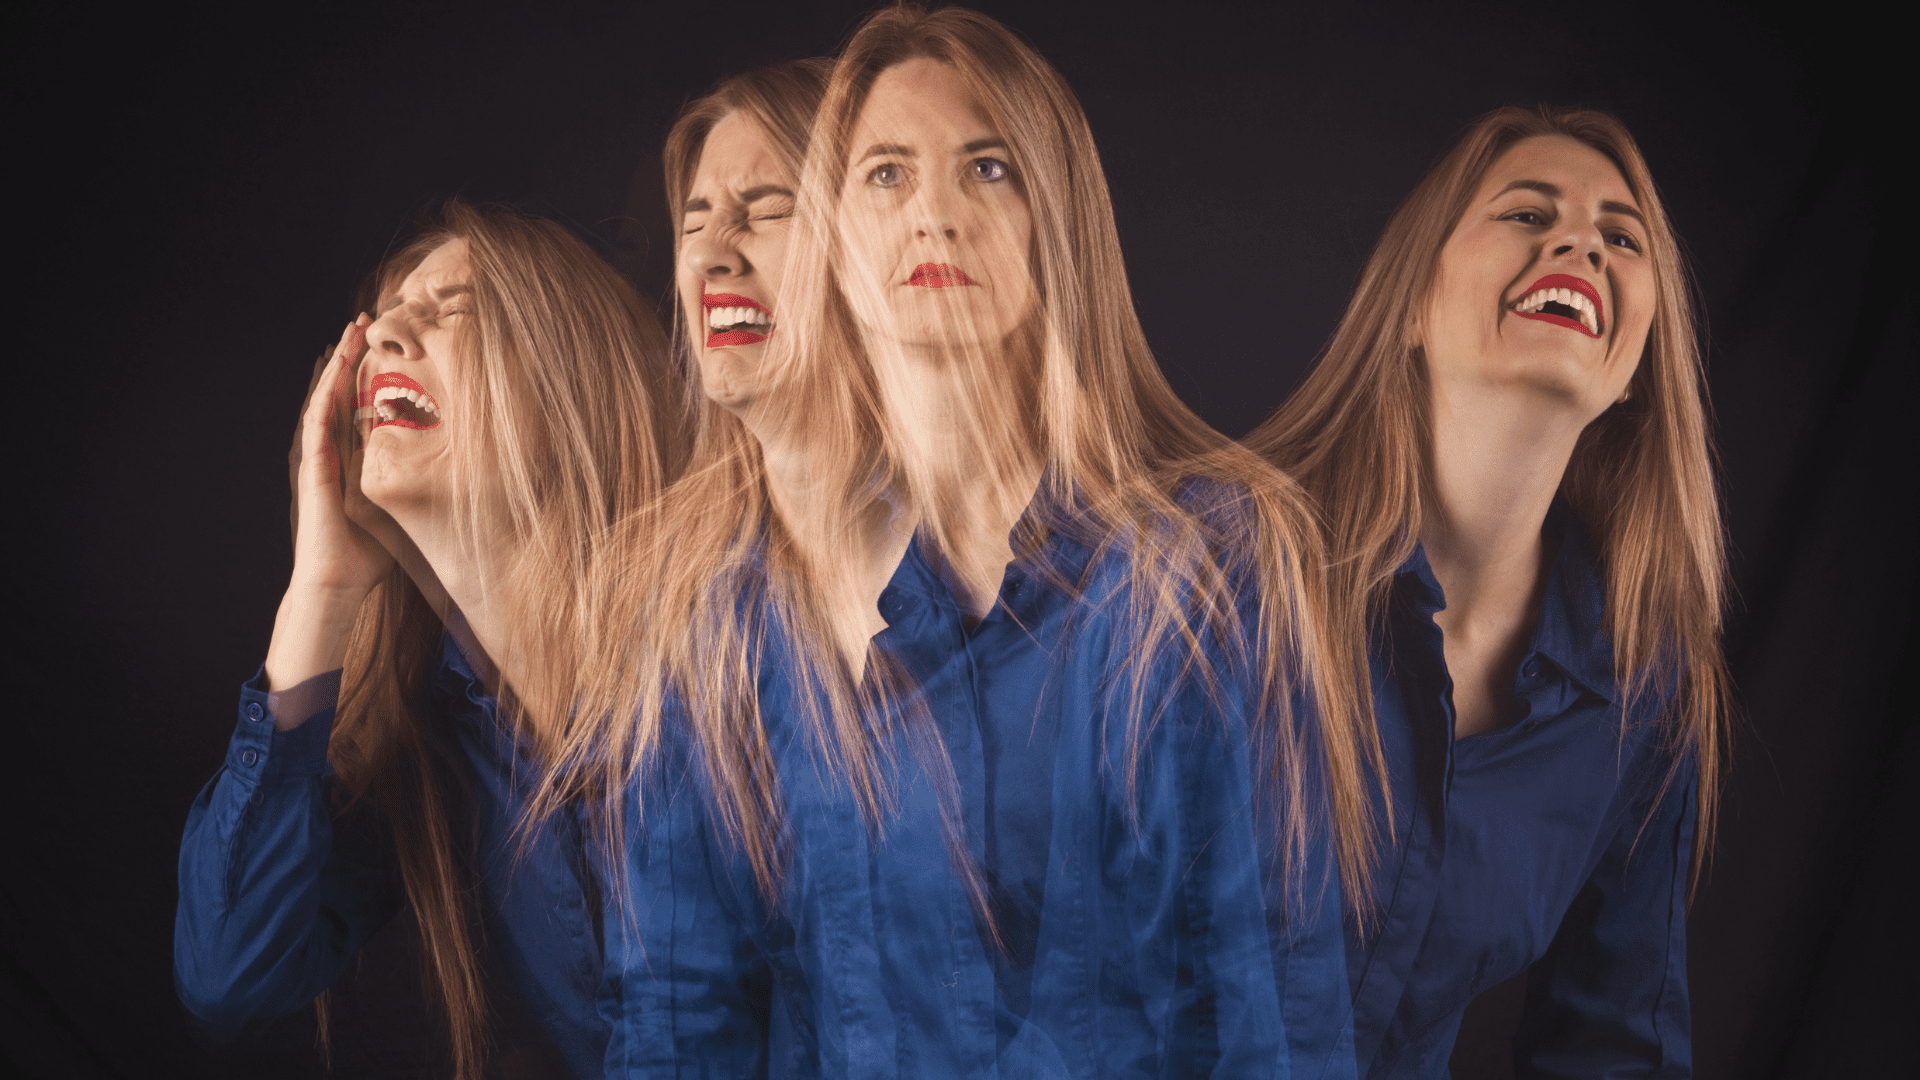 Woman experiencing a range of emotions, symbolizing Help for Dissociative Disorders, with Neuroscientific Options and Brain-based Coaching solutions highlighted